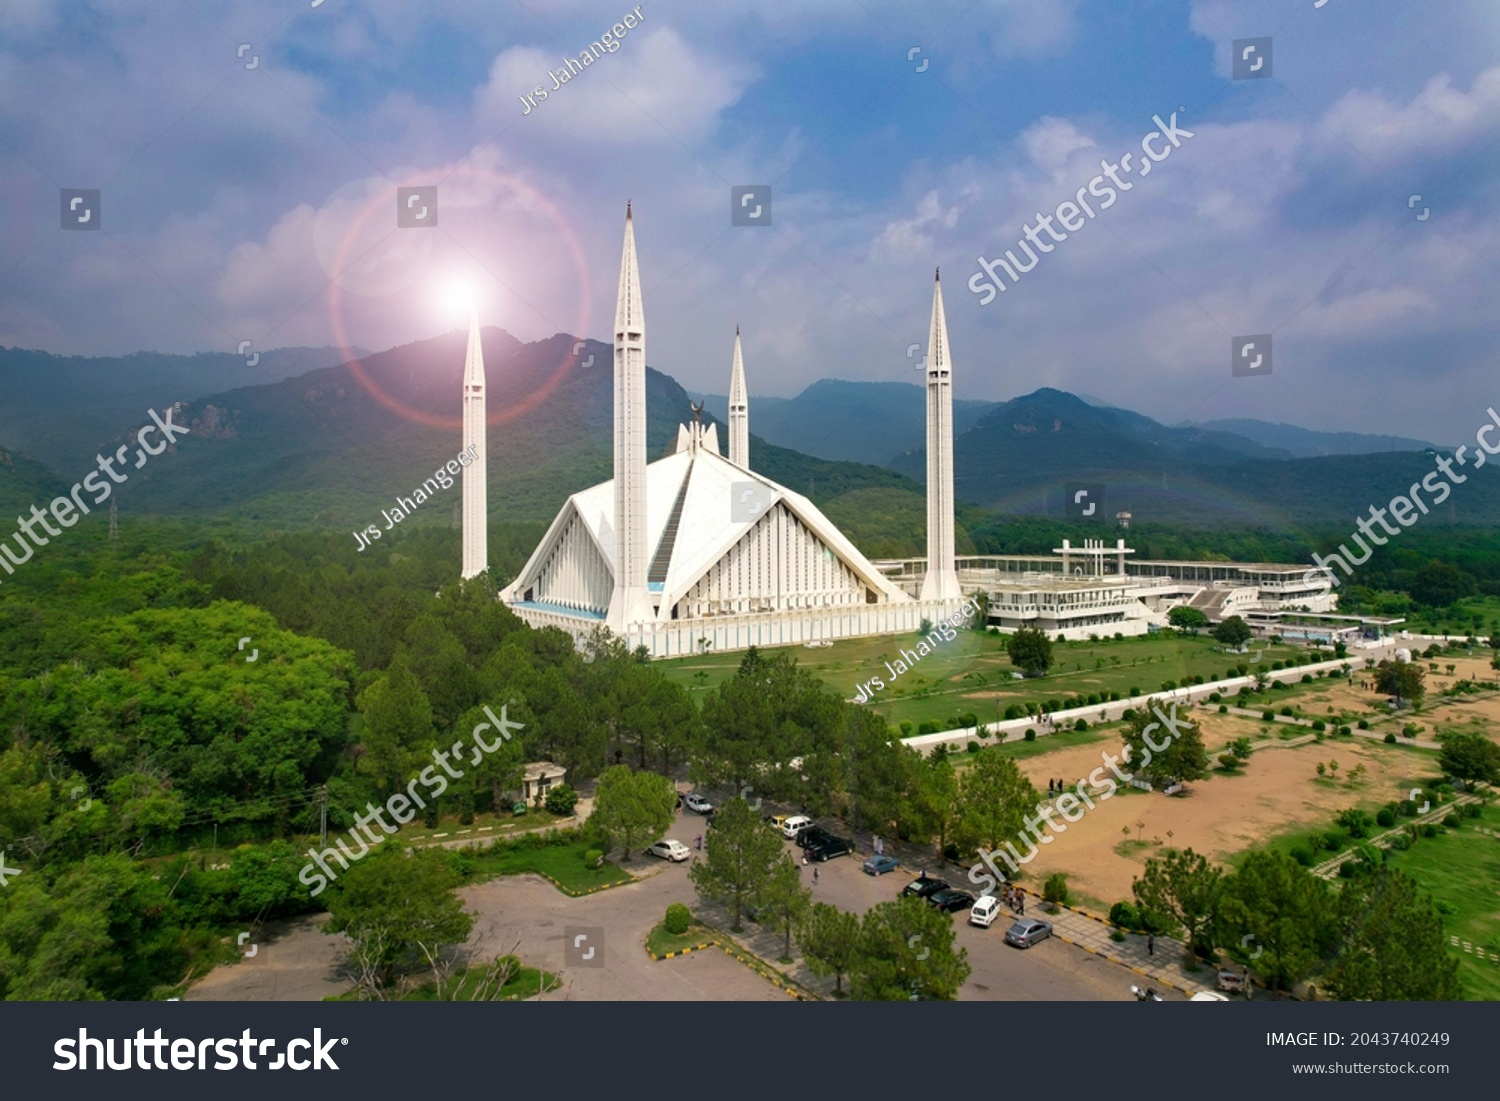 Aerial shot of Islamabad, the capital city of Pakistan showing the landmark Shah Faisal Mosque and the lush green mountains of Margala Hills #2043740249